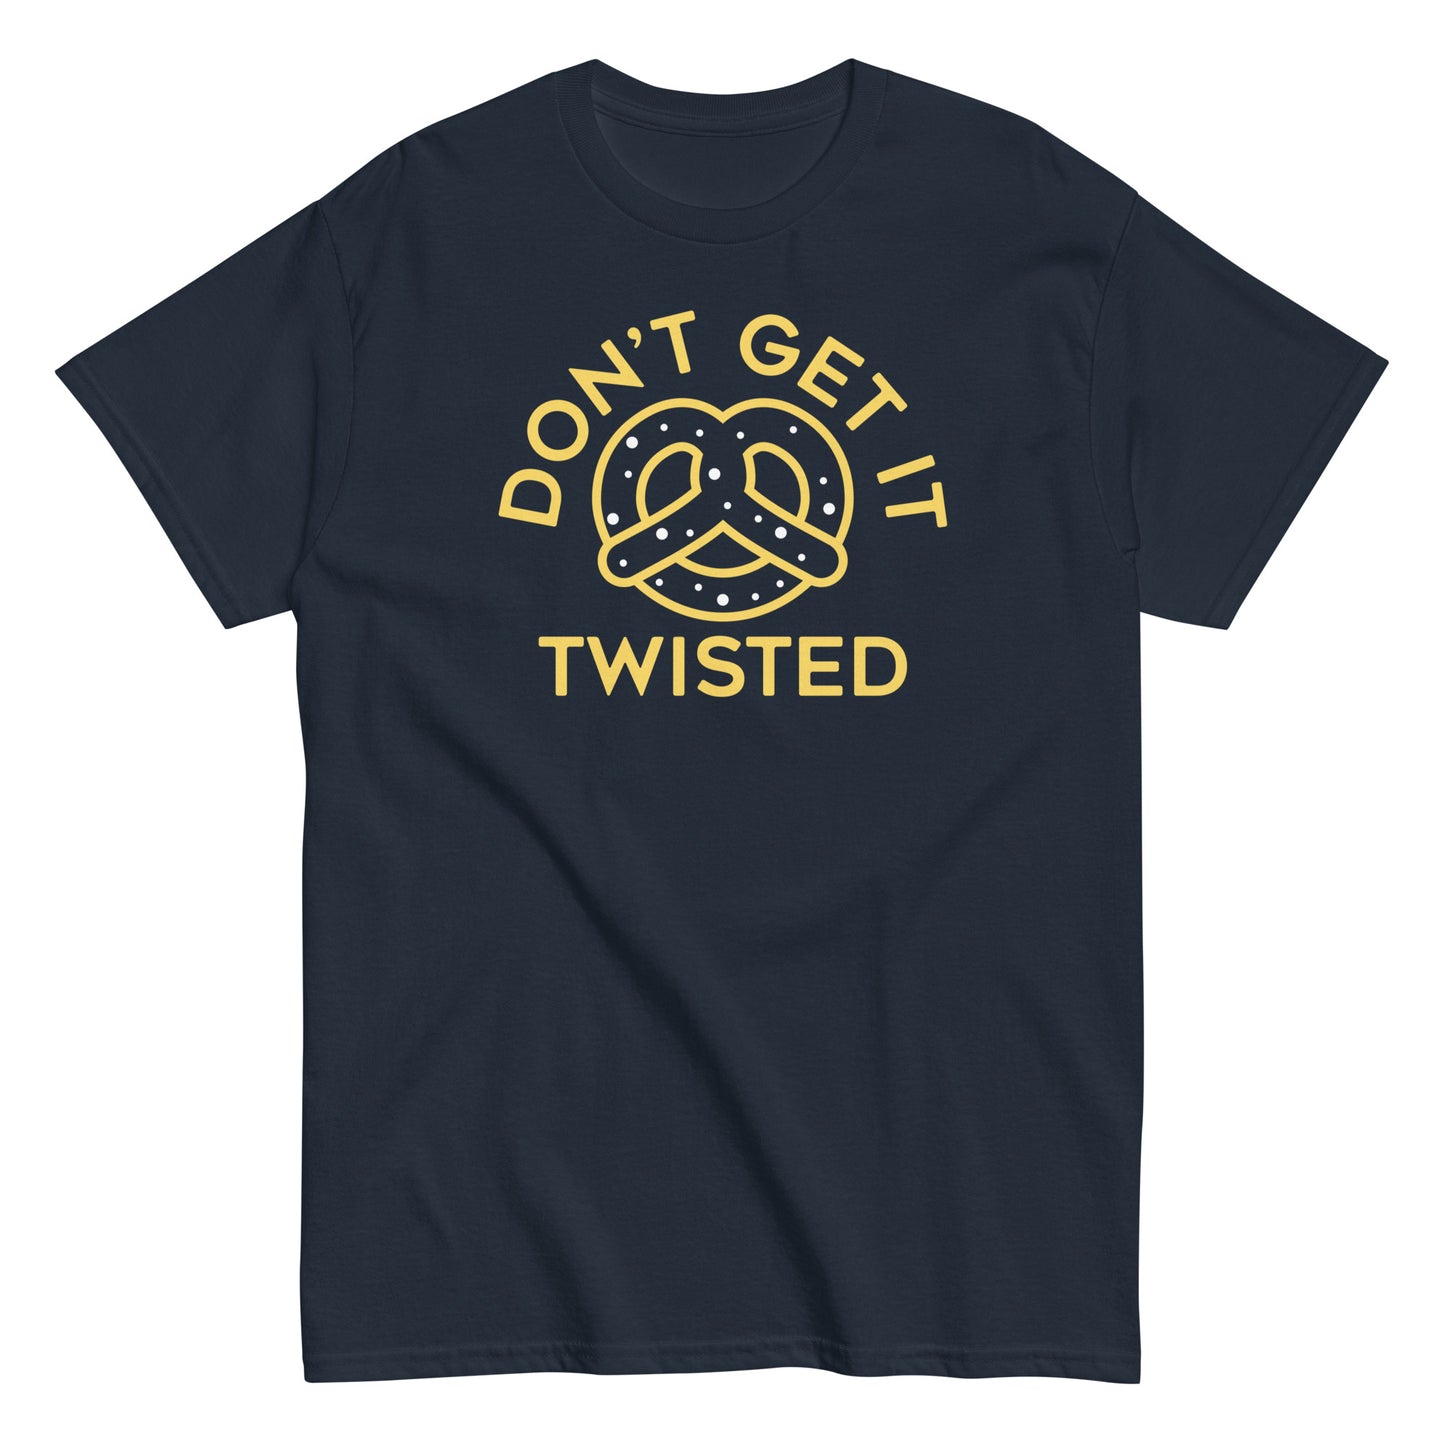 Don't Get It Twisted Men's Classic Tee